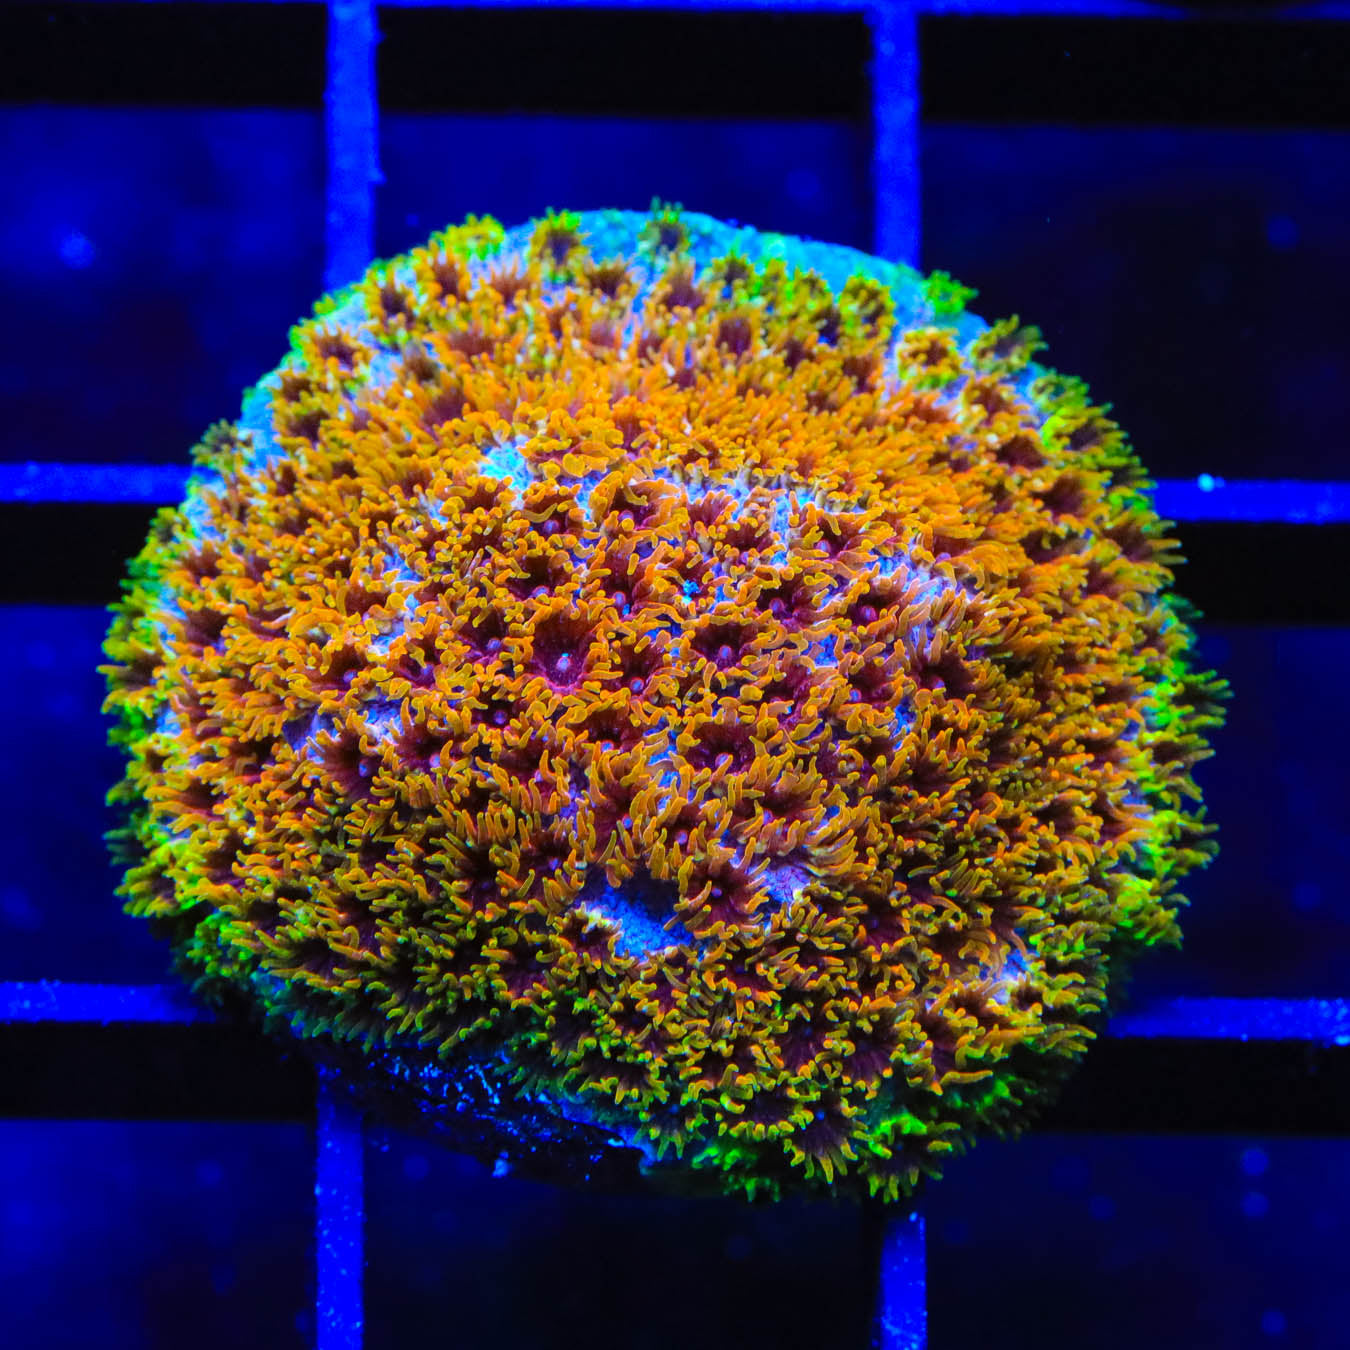 WWC Skittles Bomb Cyphastrea Coral